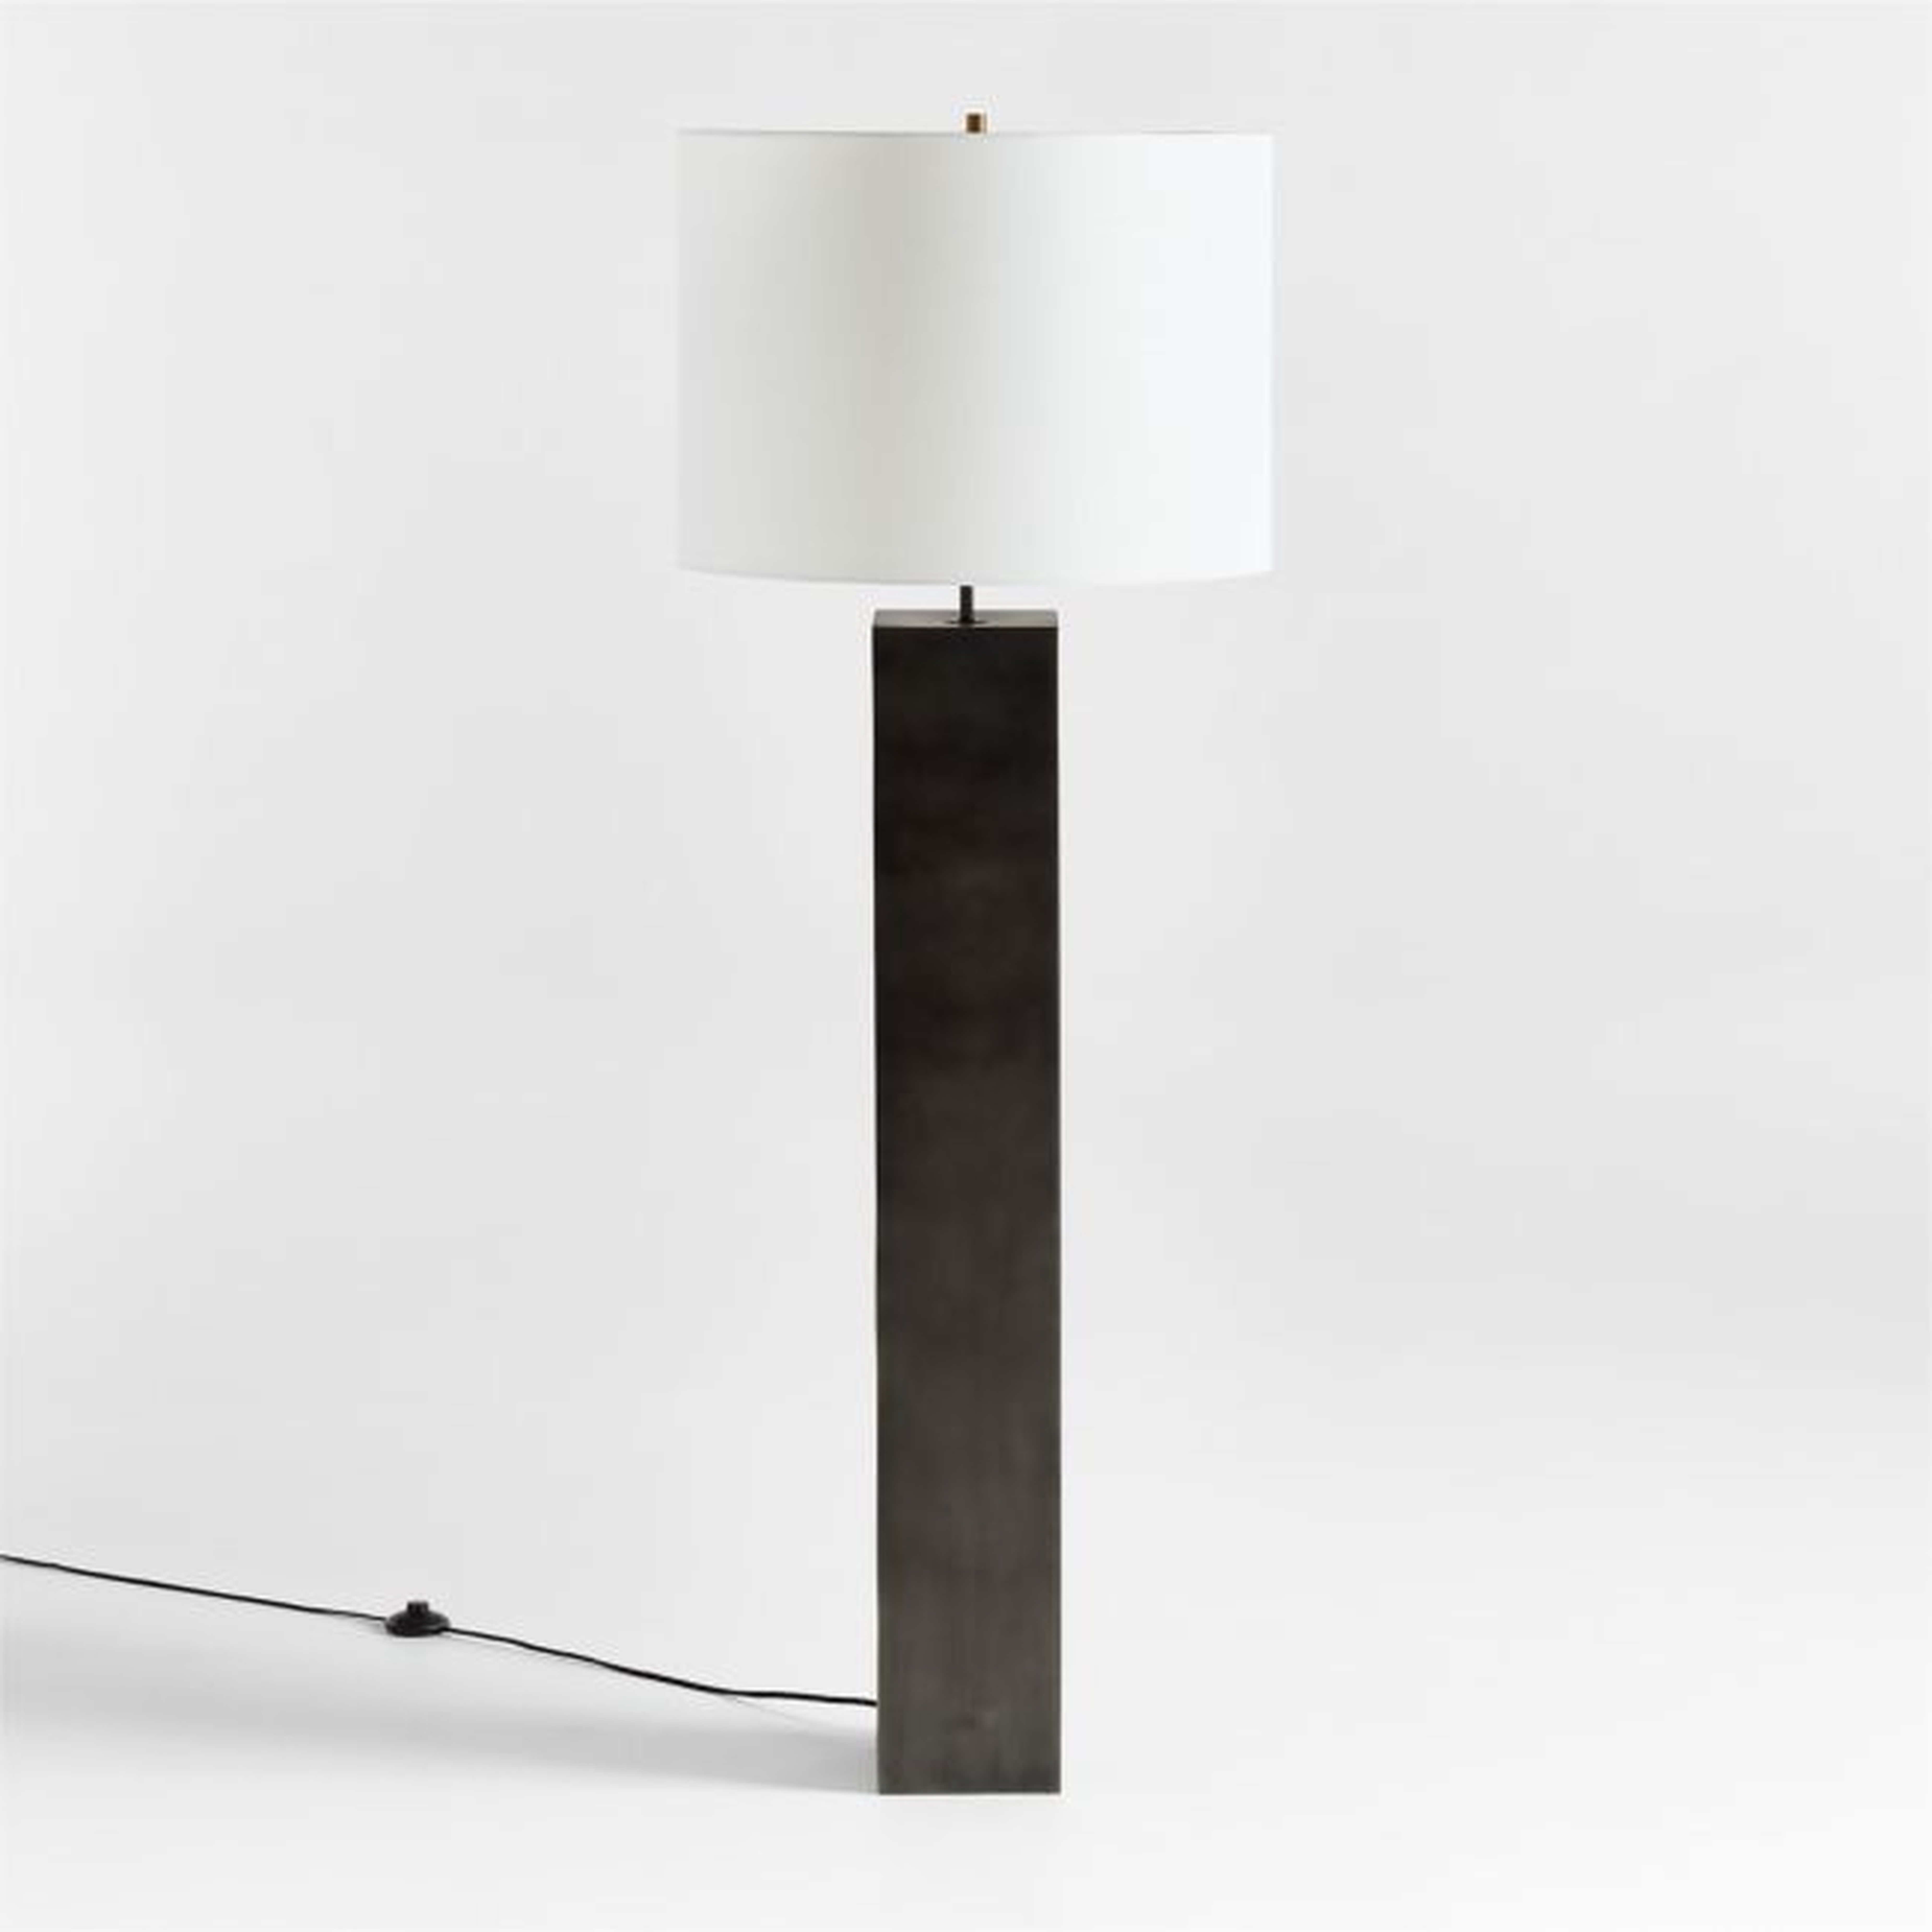 Folie Black Square Floor Lamp with Drum Shade - Crate and Barrel